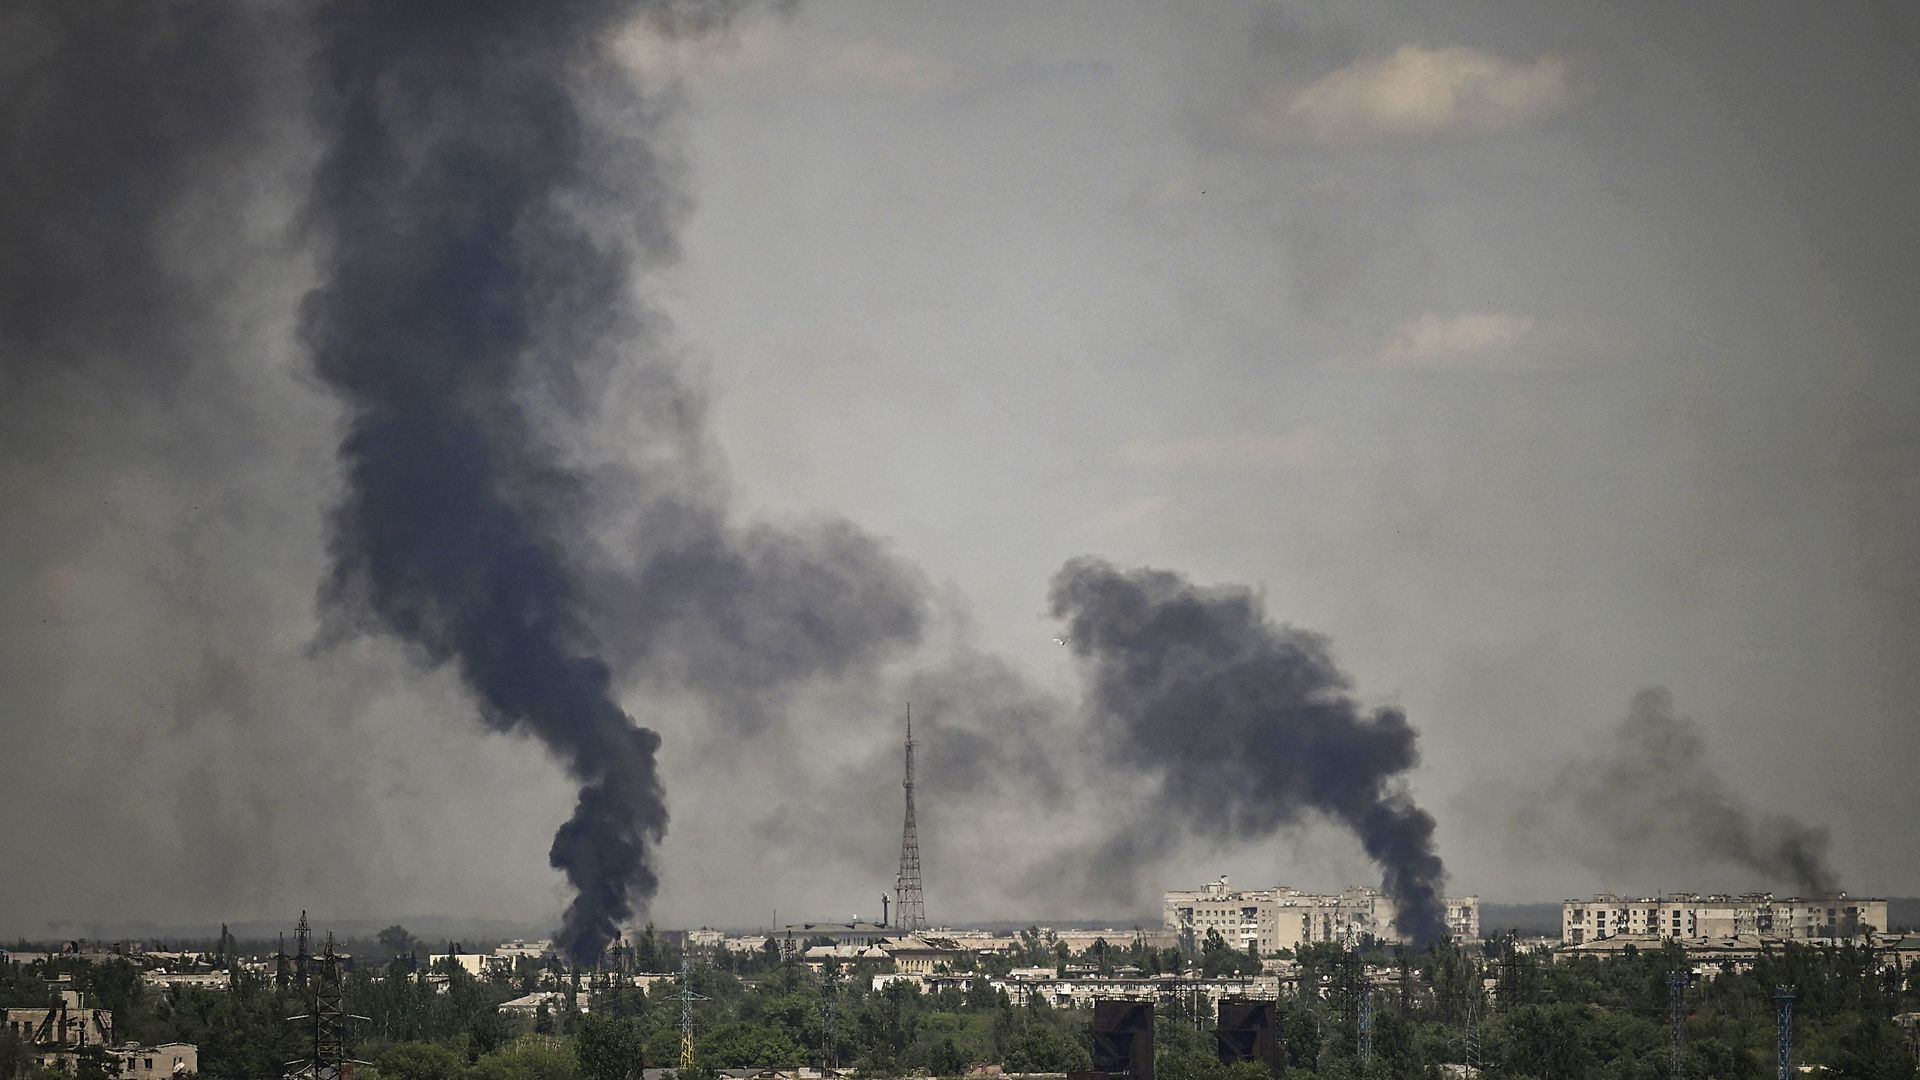 Smoke rises in the city of Severodonetsk during heavy fightings between Ukrainian and Russian troops at eastern Ukrainian region of Donbas on May 30.